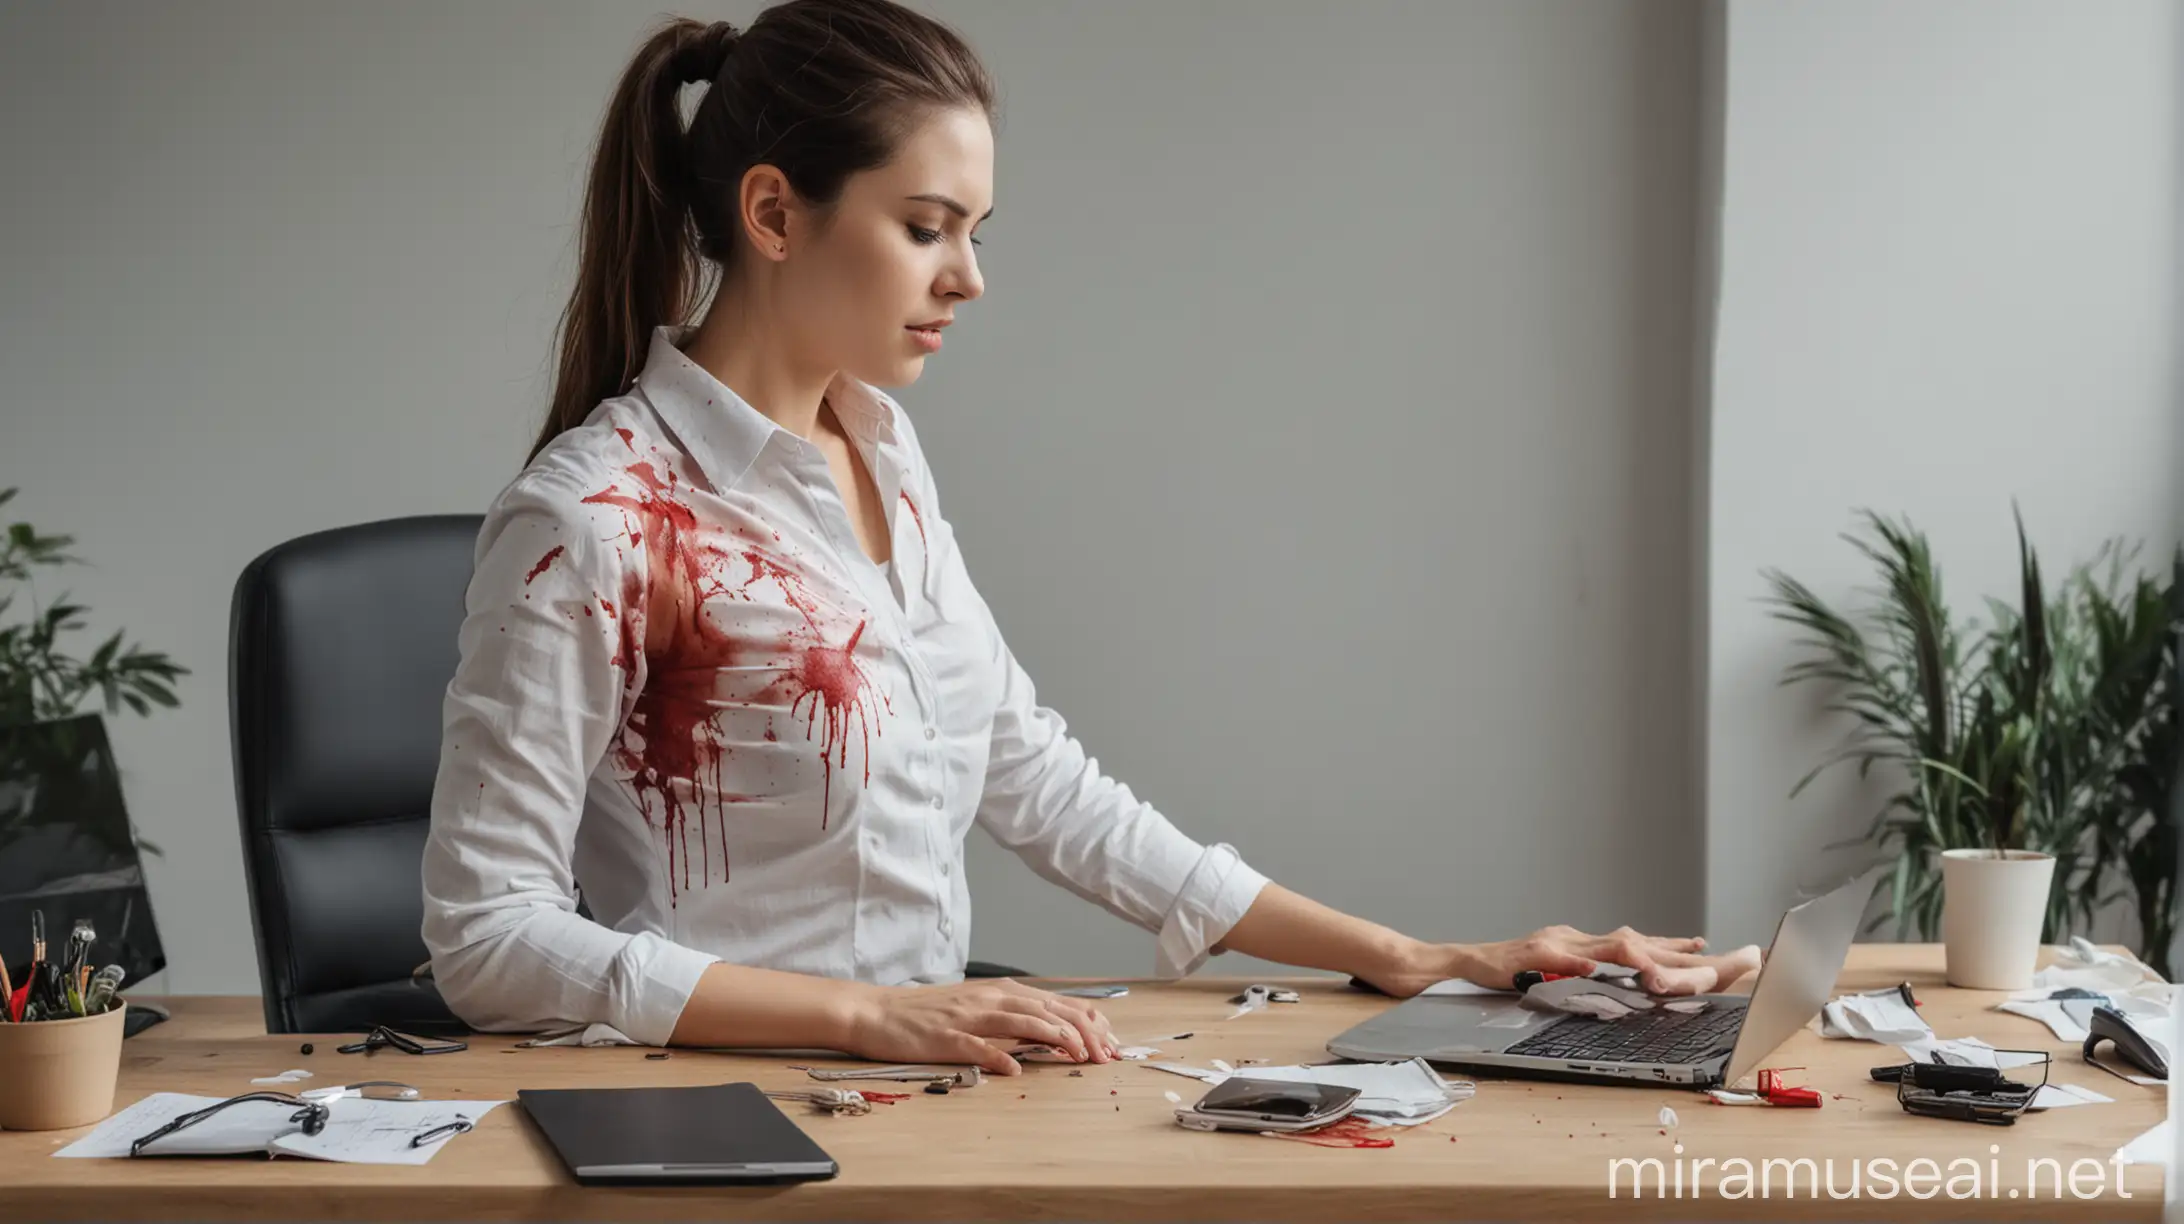 Woman Struggling with Bad Posture and Bleeding Hands at Office Desk